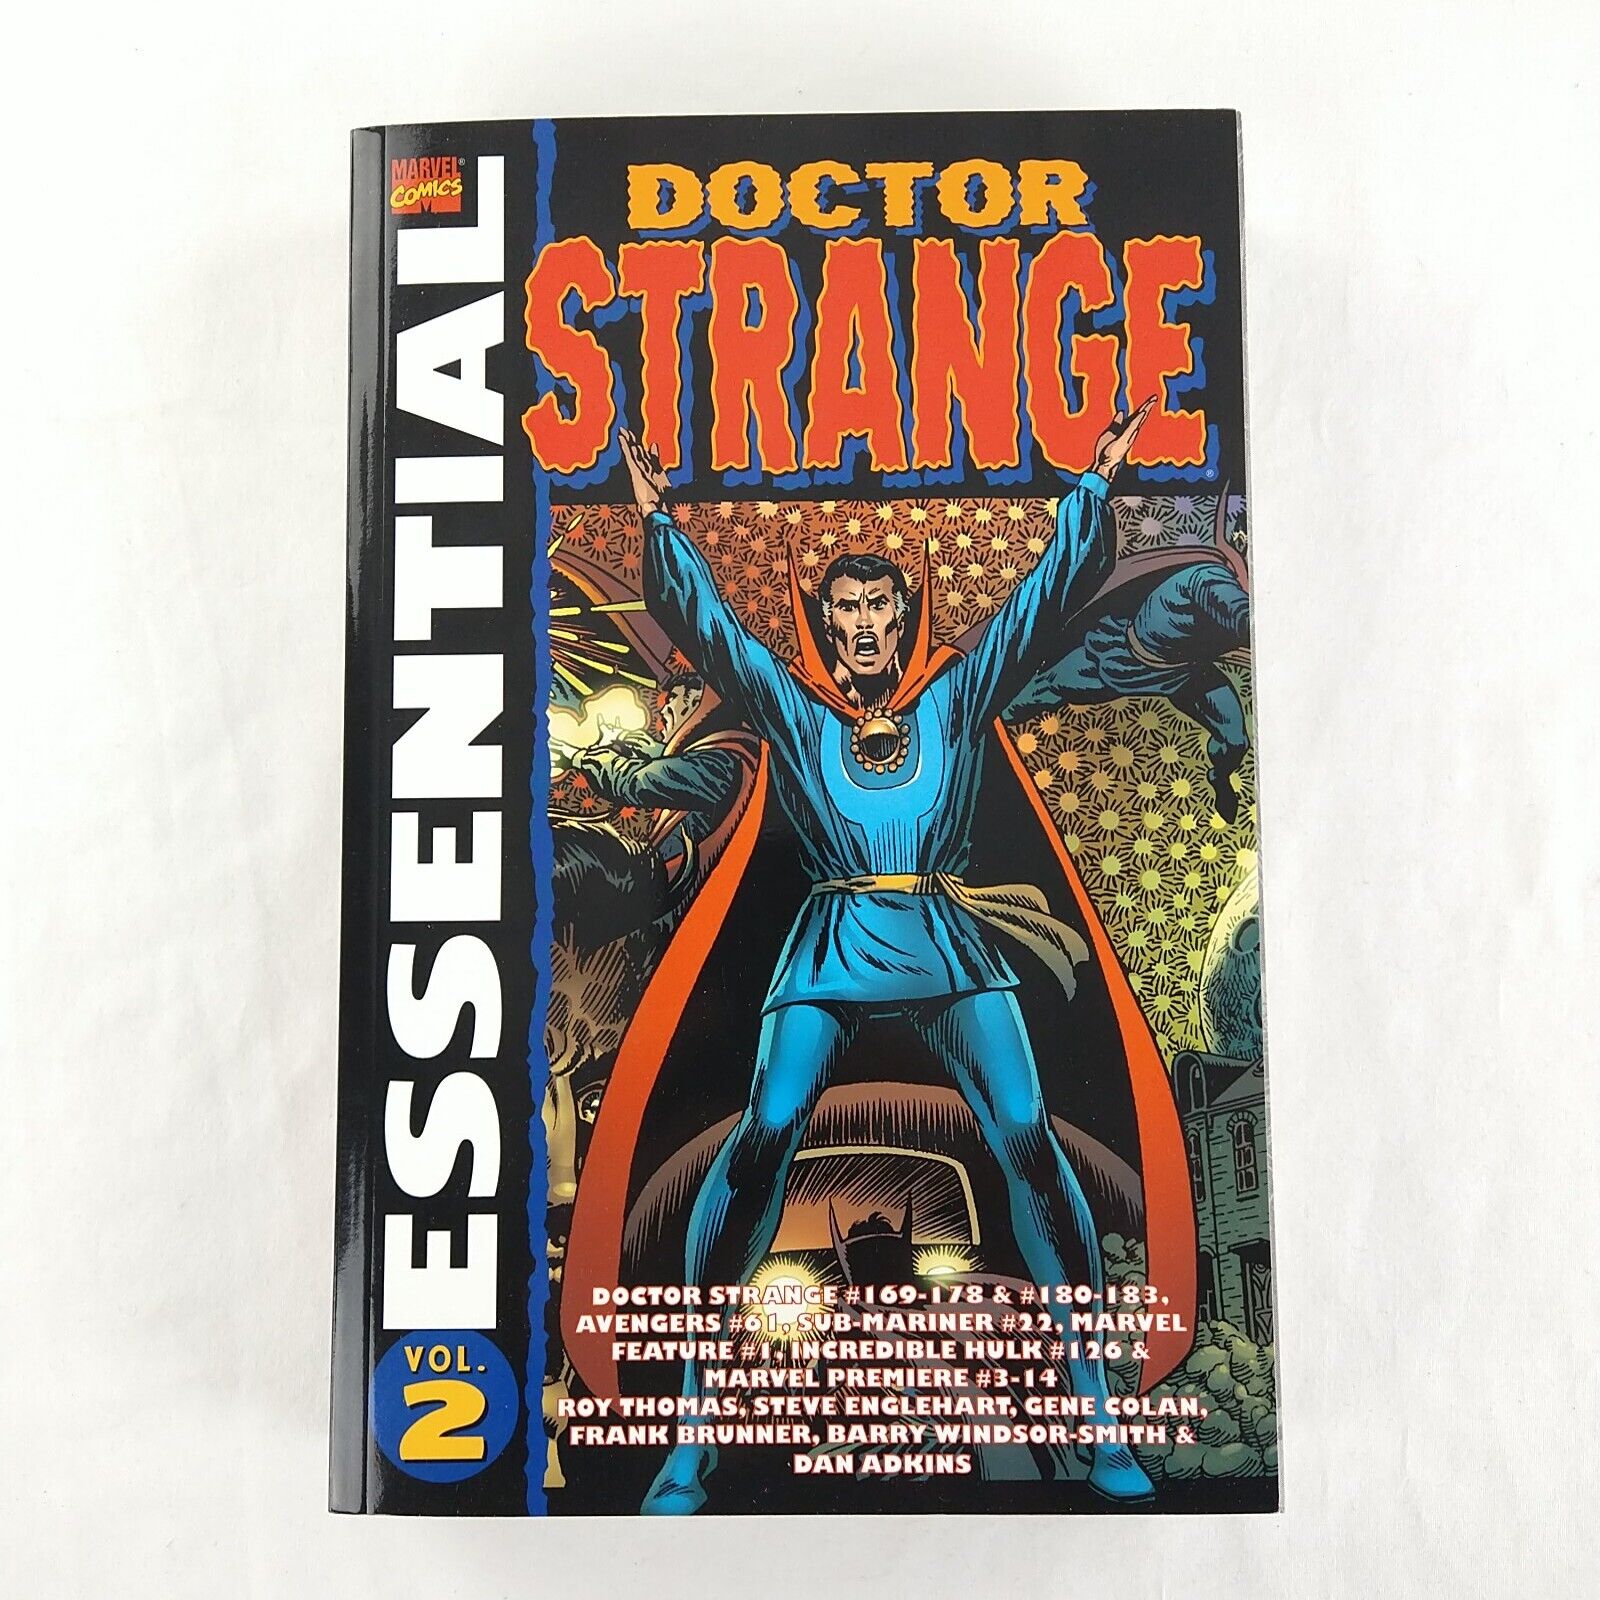 Essential Doctor Strange Volume #2 NM TPB Collects #169-178 + More (2005 Marvel)